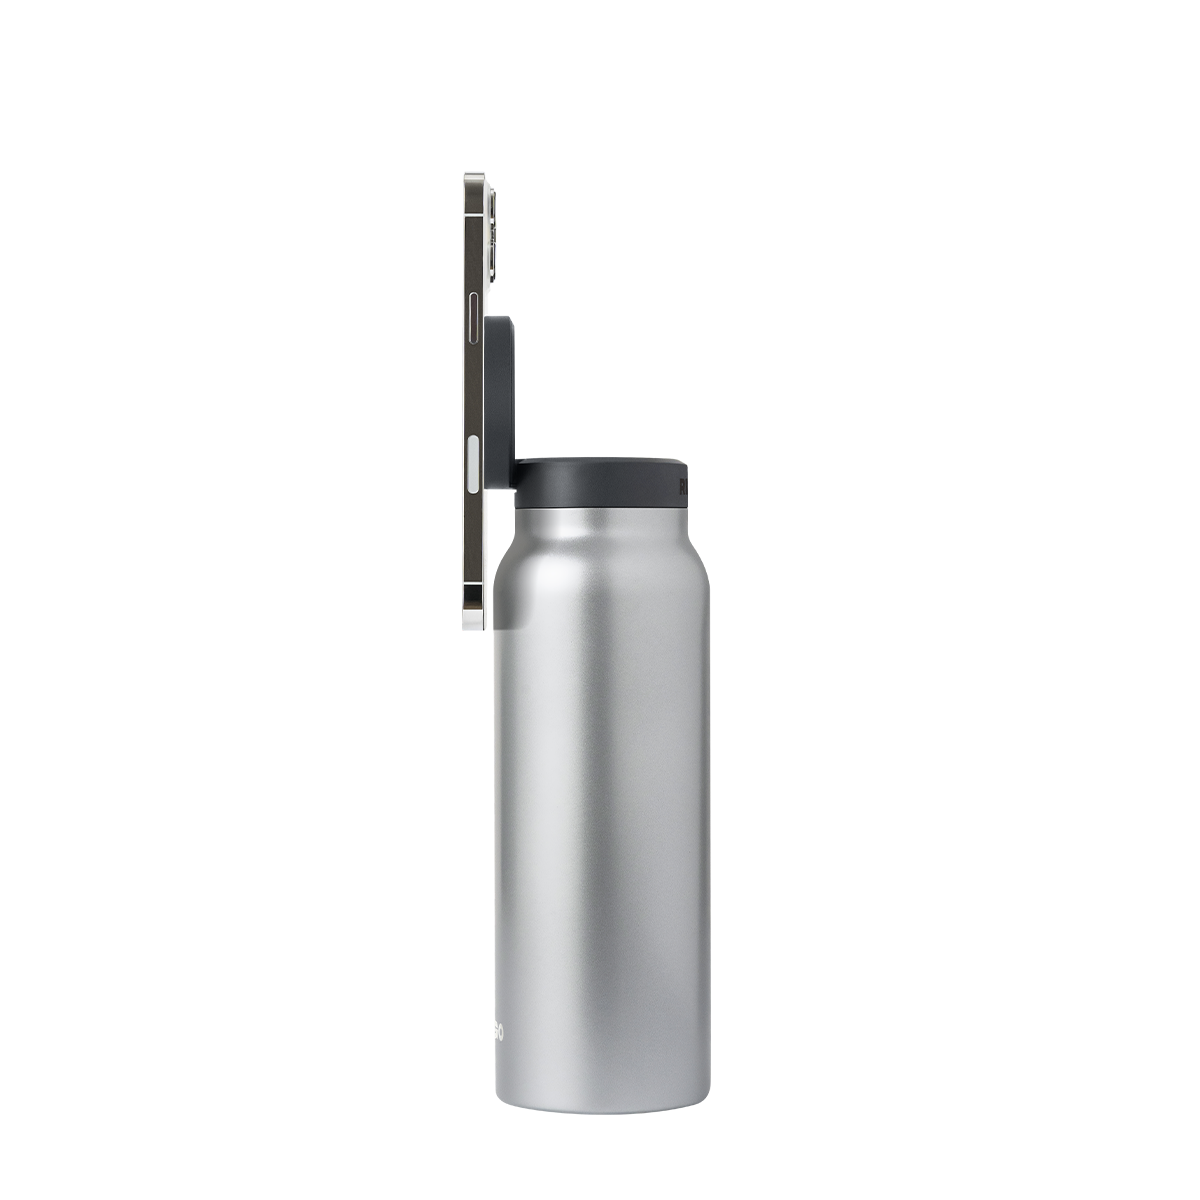 RhinoShield AquaStand Magnetic Bottle 23 oz | Stainless Steel Insulated  Water Bottle with Straw Lid,…See more RhinoShield AquaStand Magnetic Bottle  23